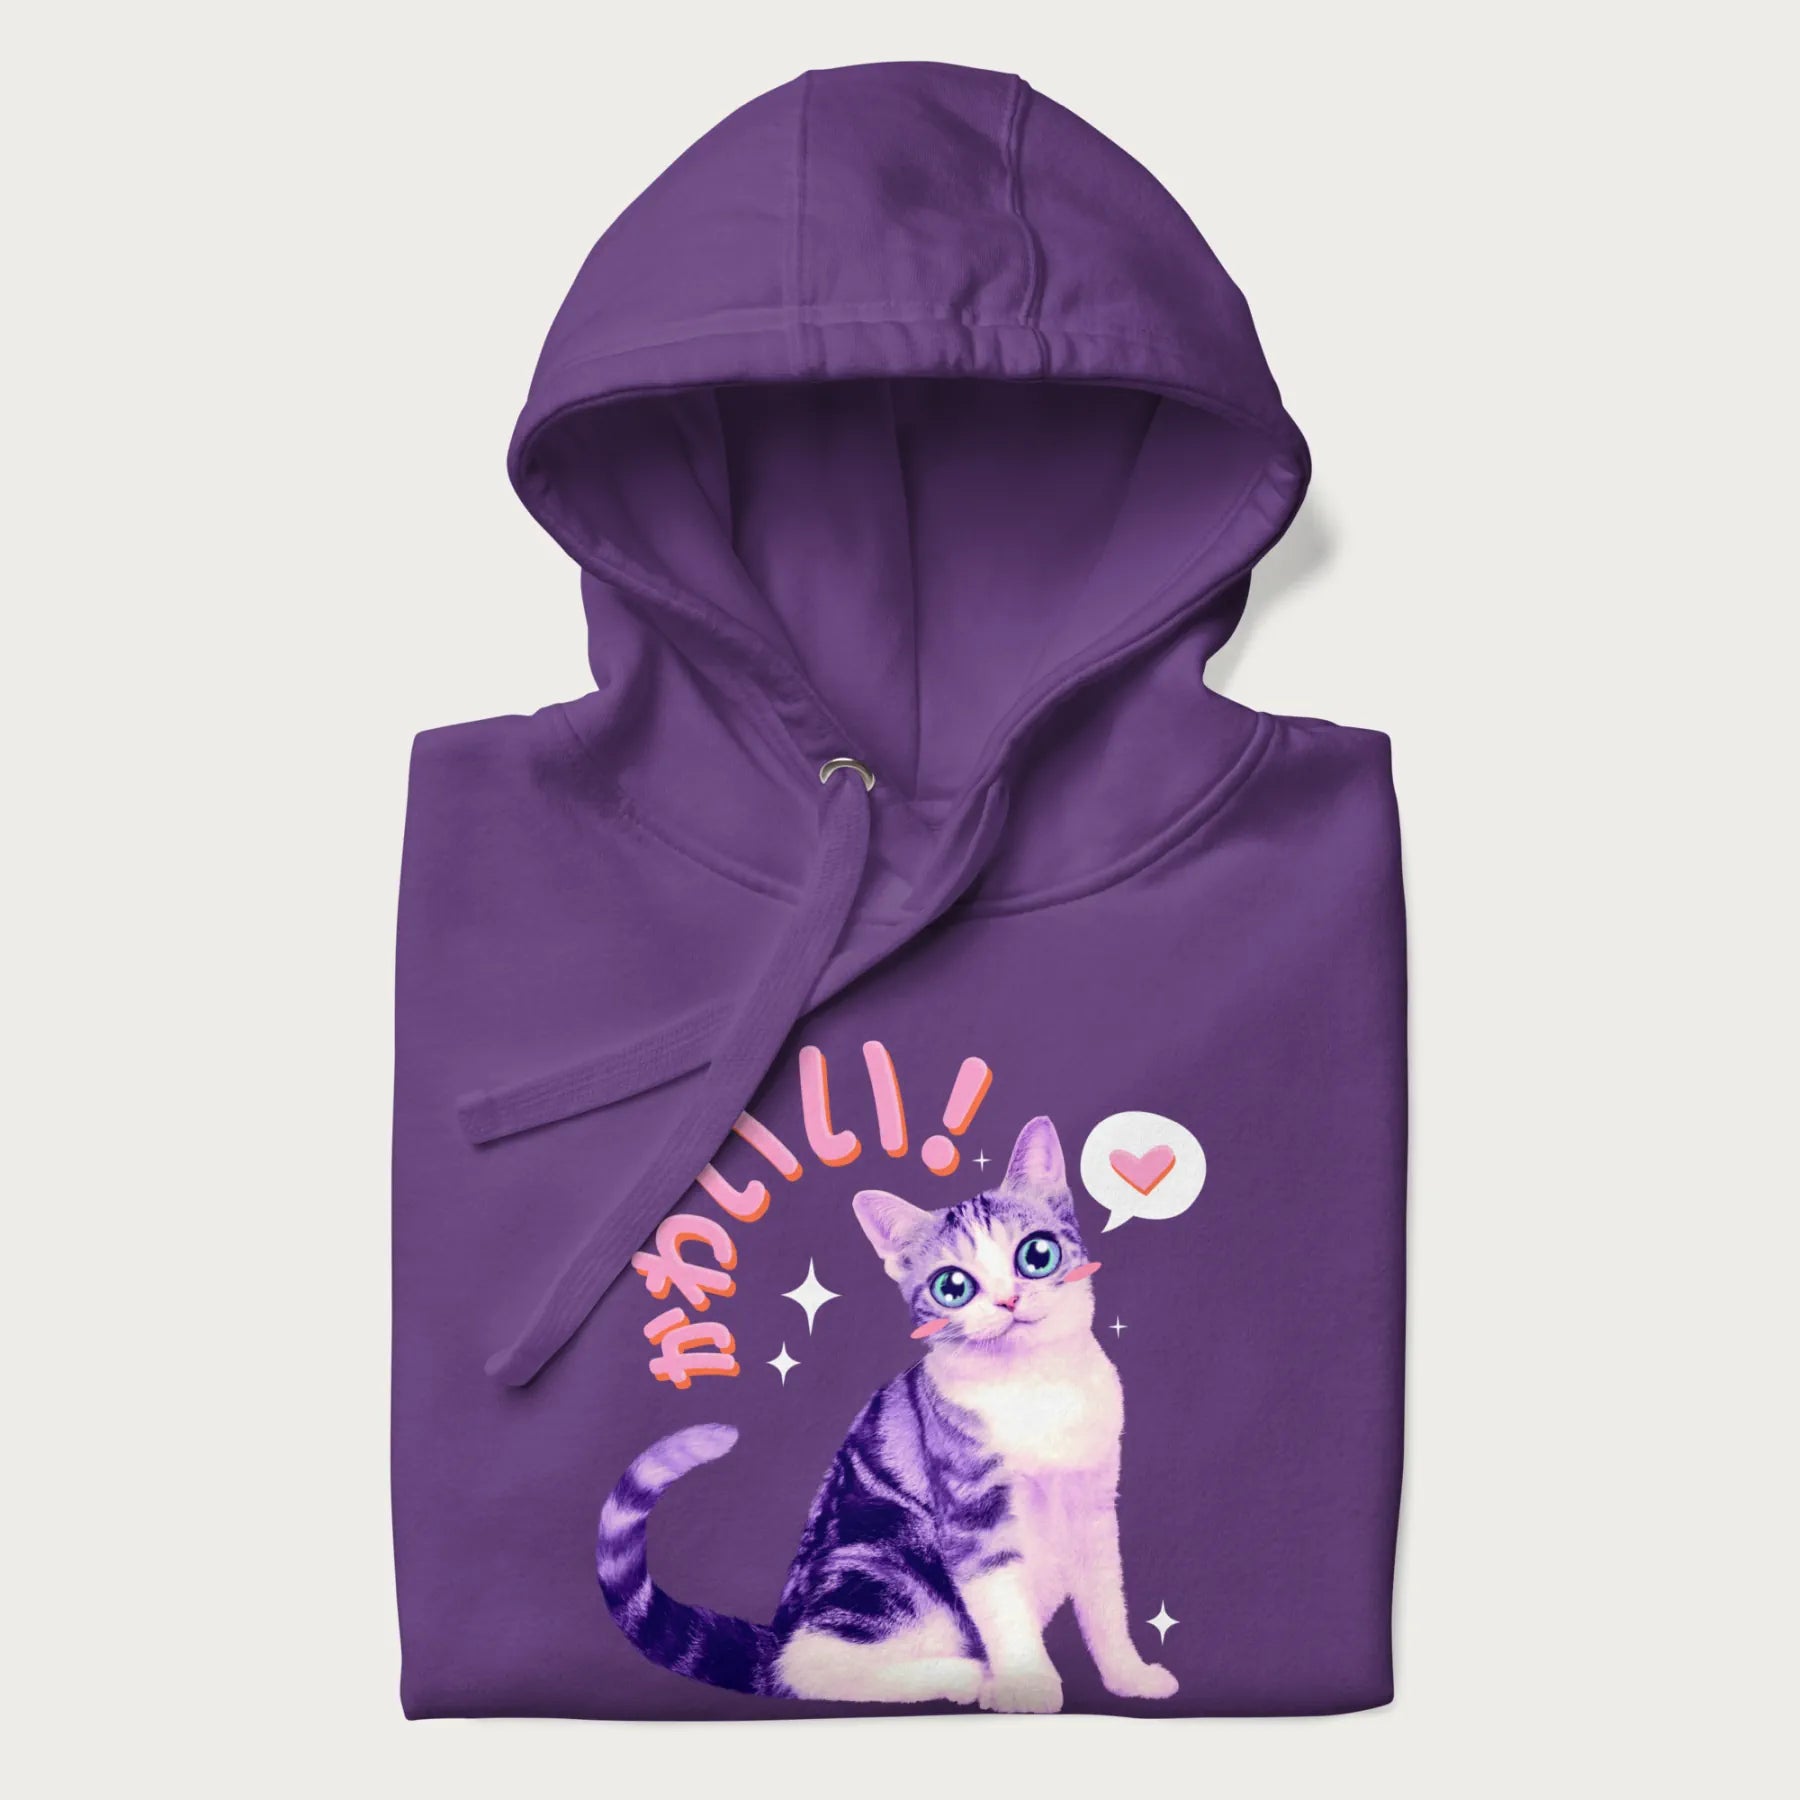 Folded purple hoodie with a graphic of a blue-eyed kitten and Japanese kawaii-style lettering, stars, and a heart.